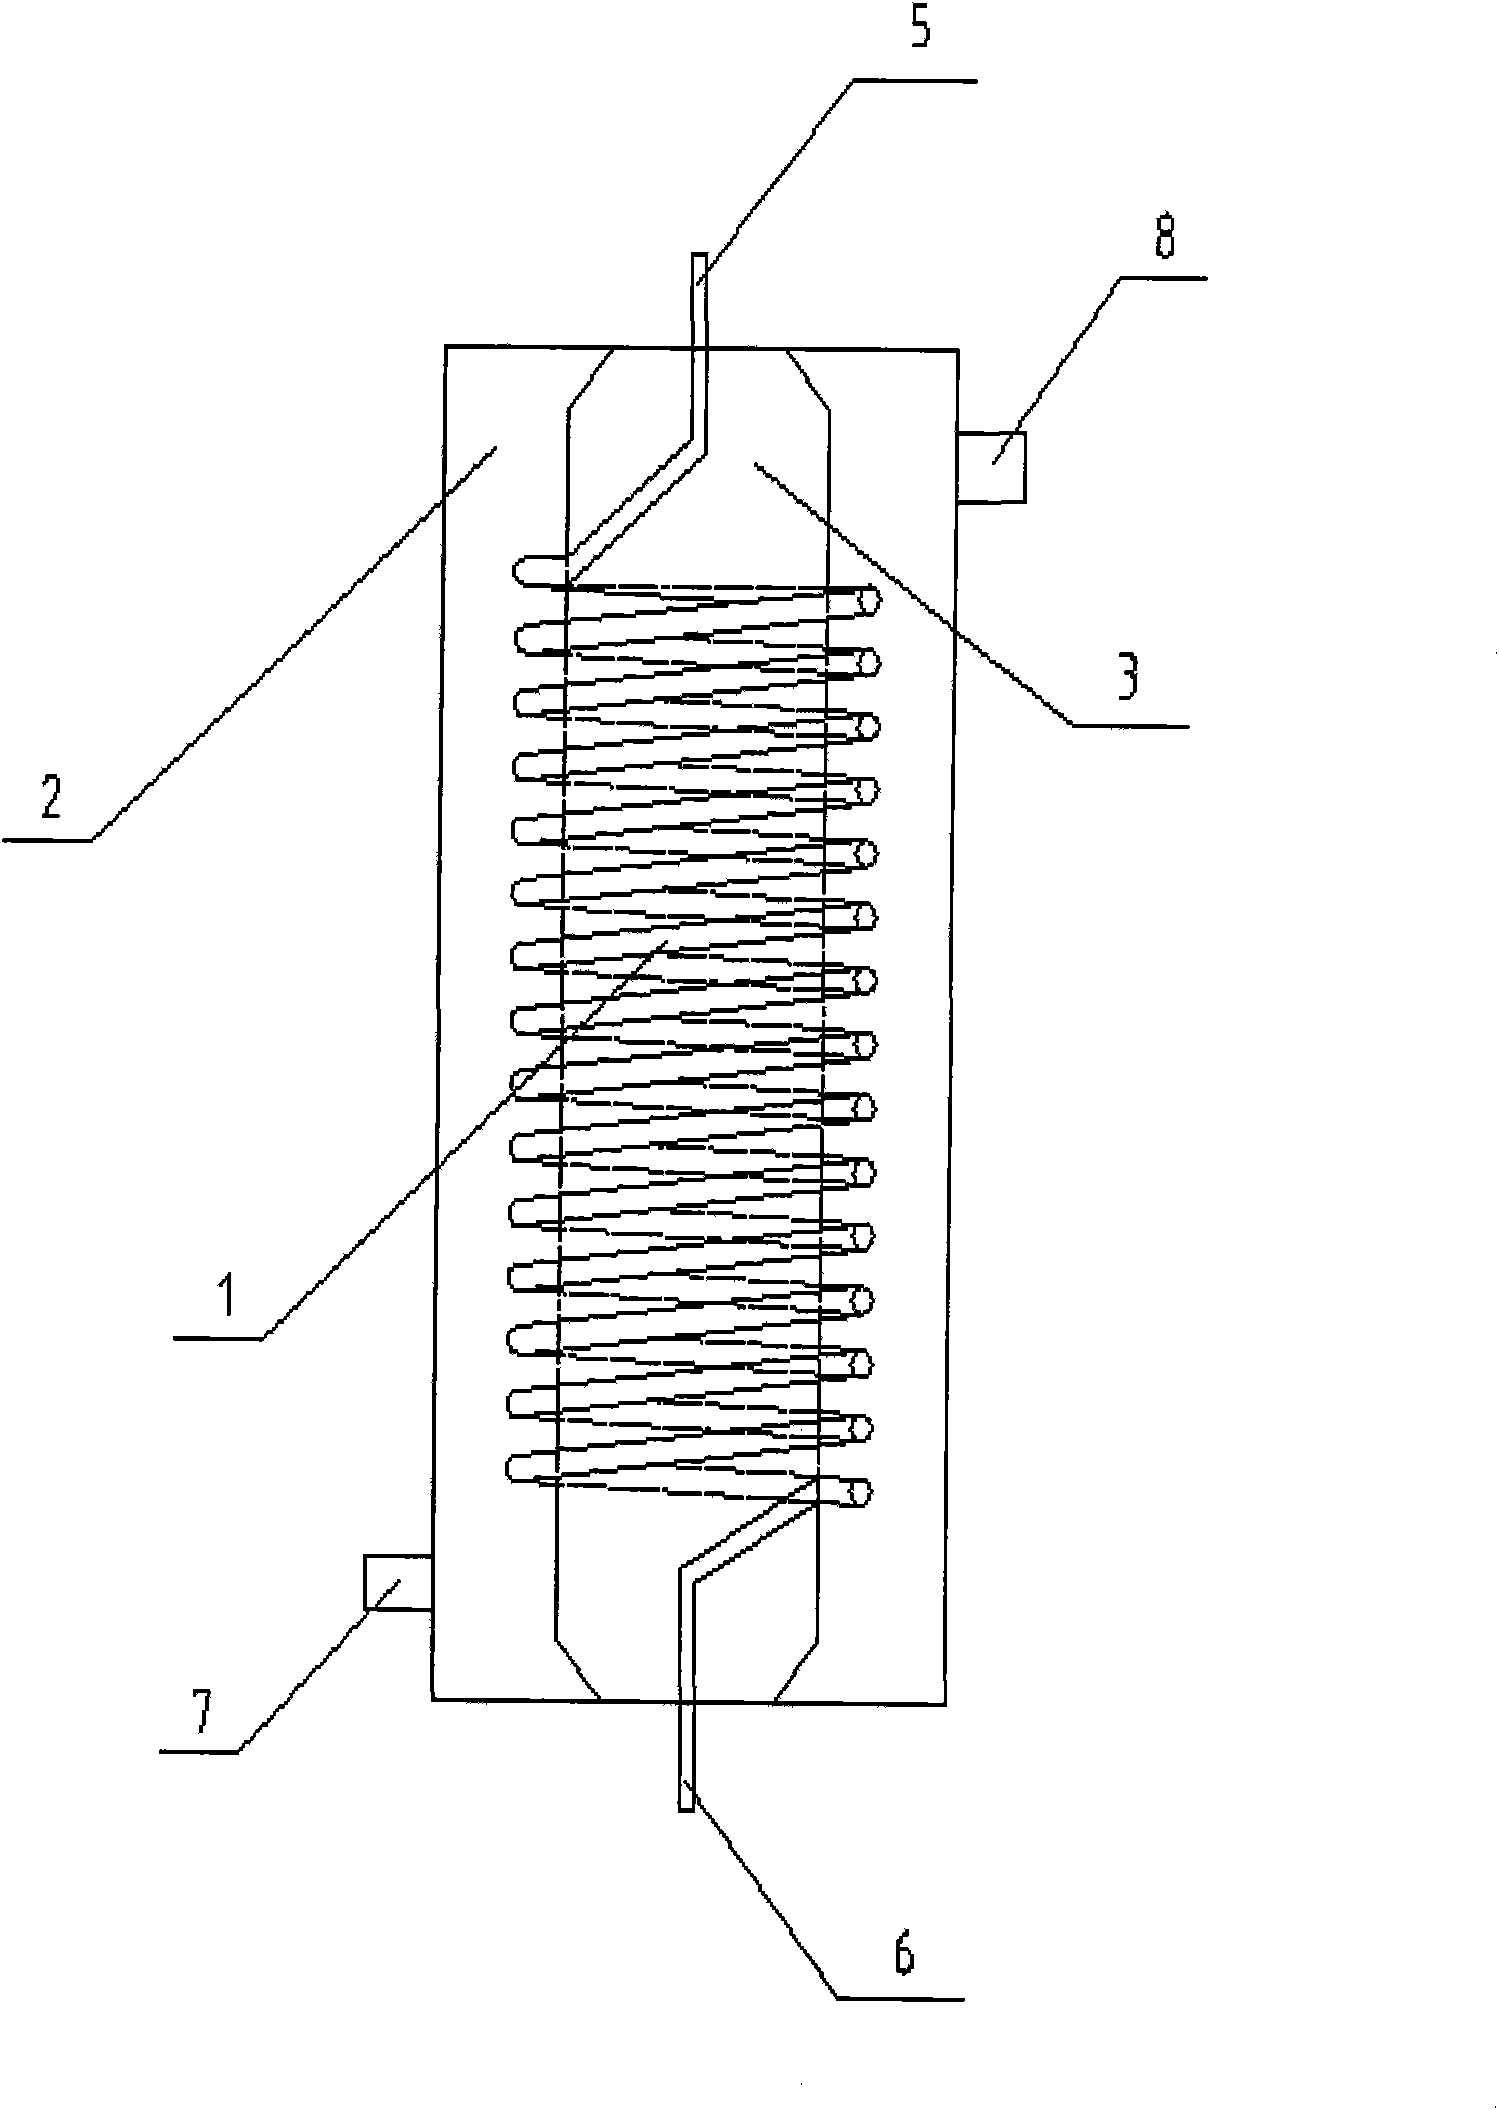 Liquid-cooled heat exchanger based on spiral structure